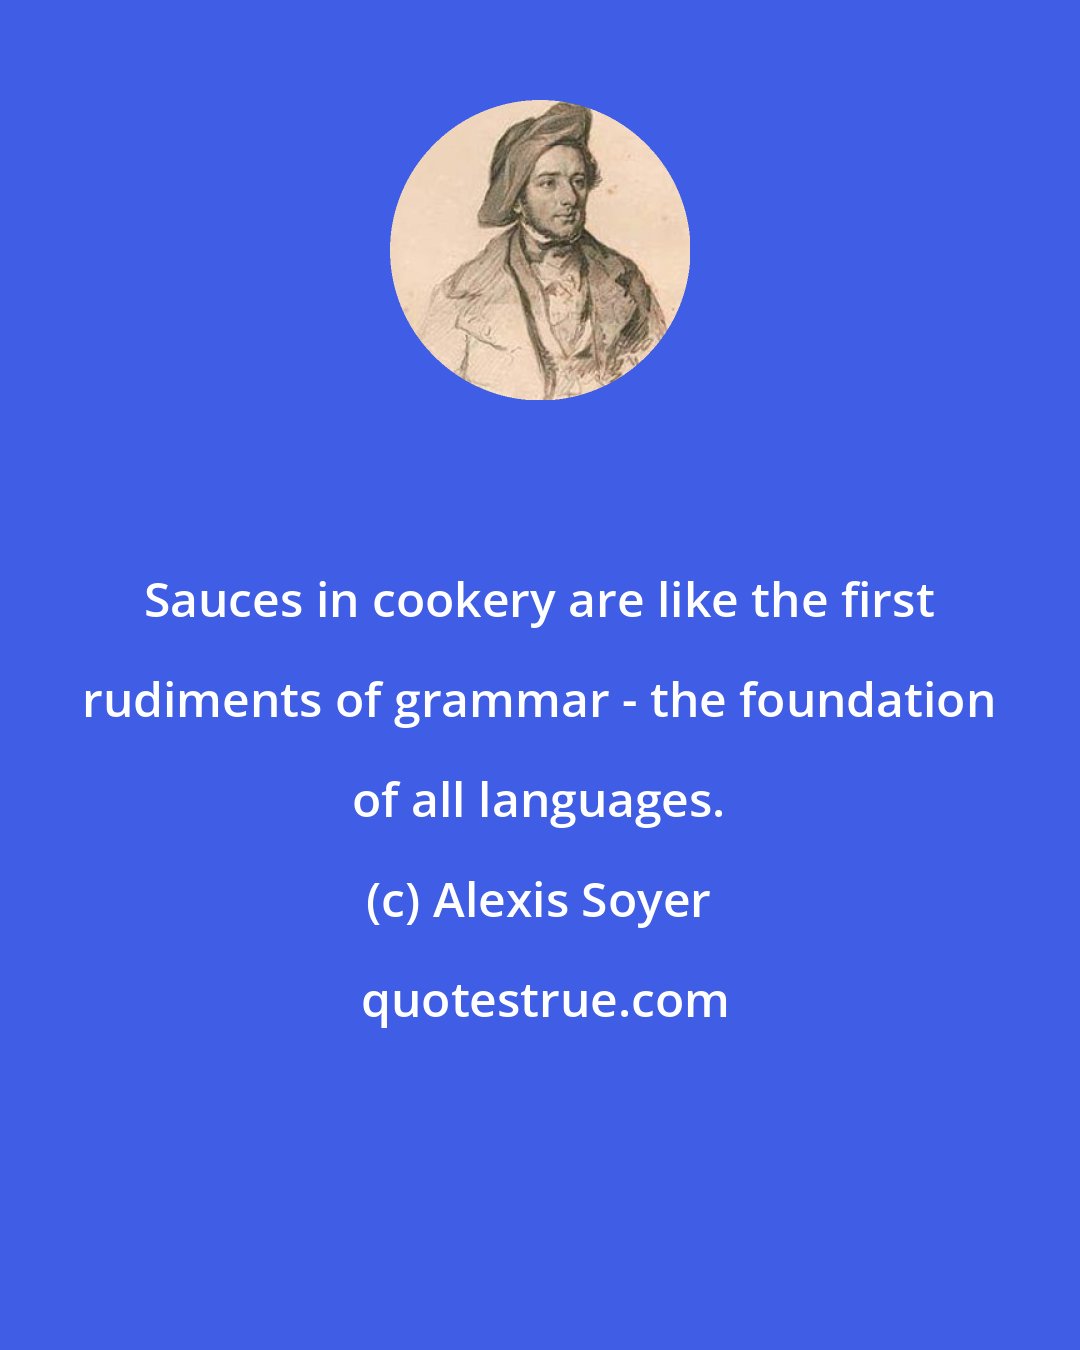 Alexis Soyer: Sauces in cookery are like the first rudiments of grammar - the foundation of all languages.